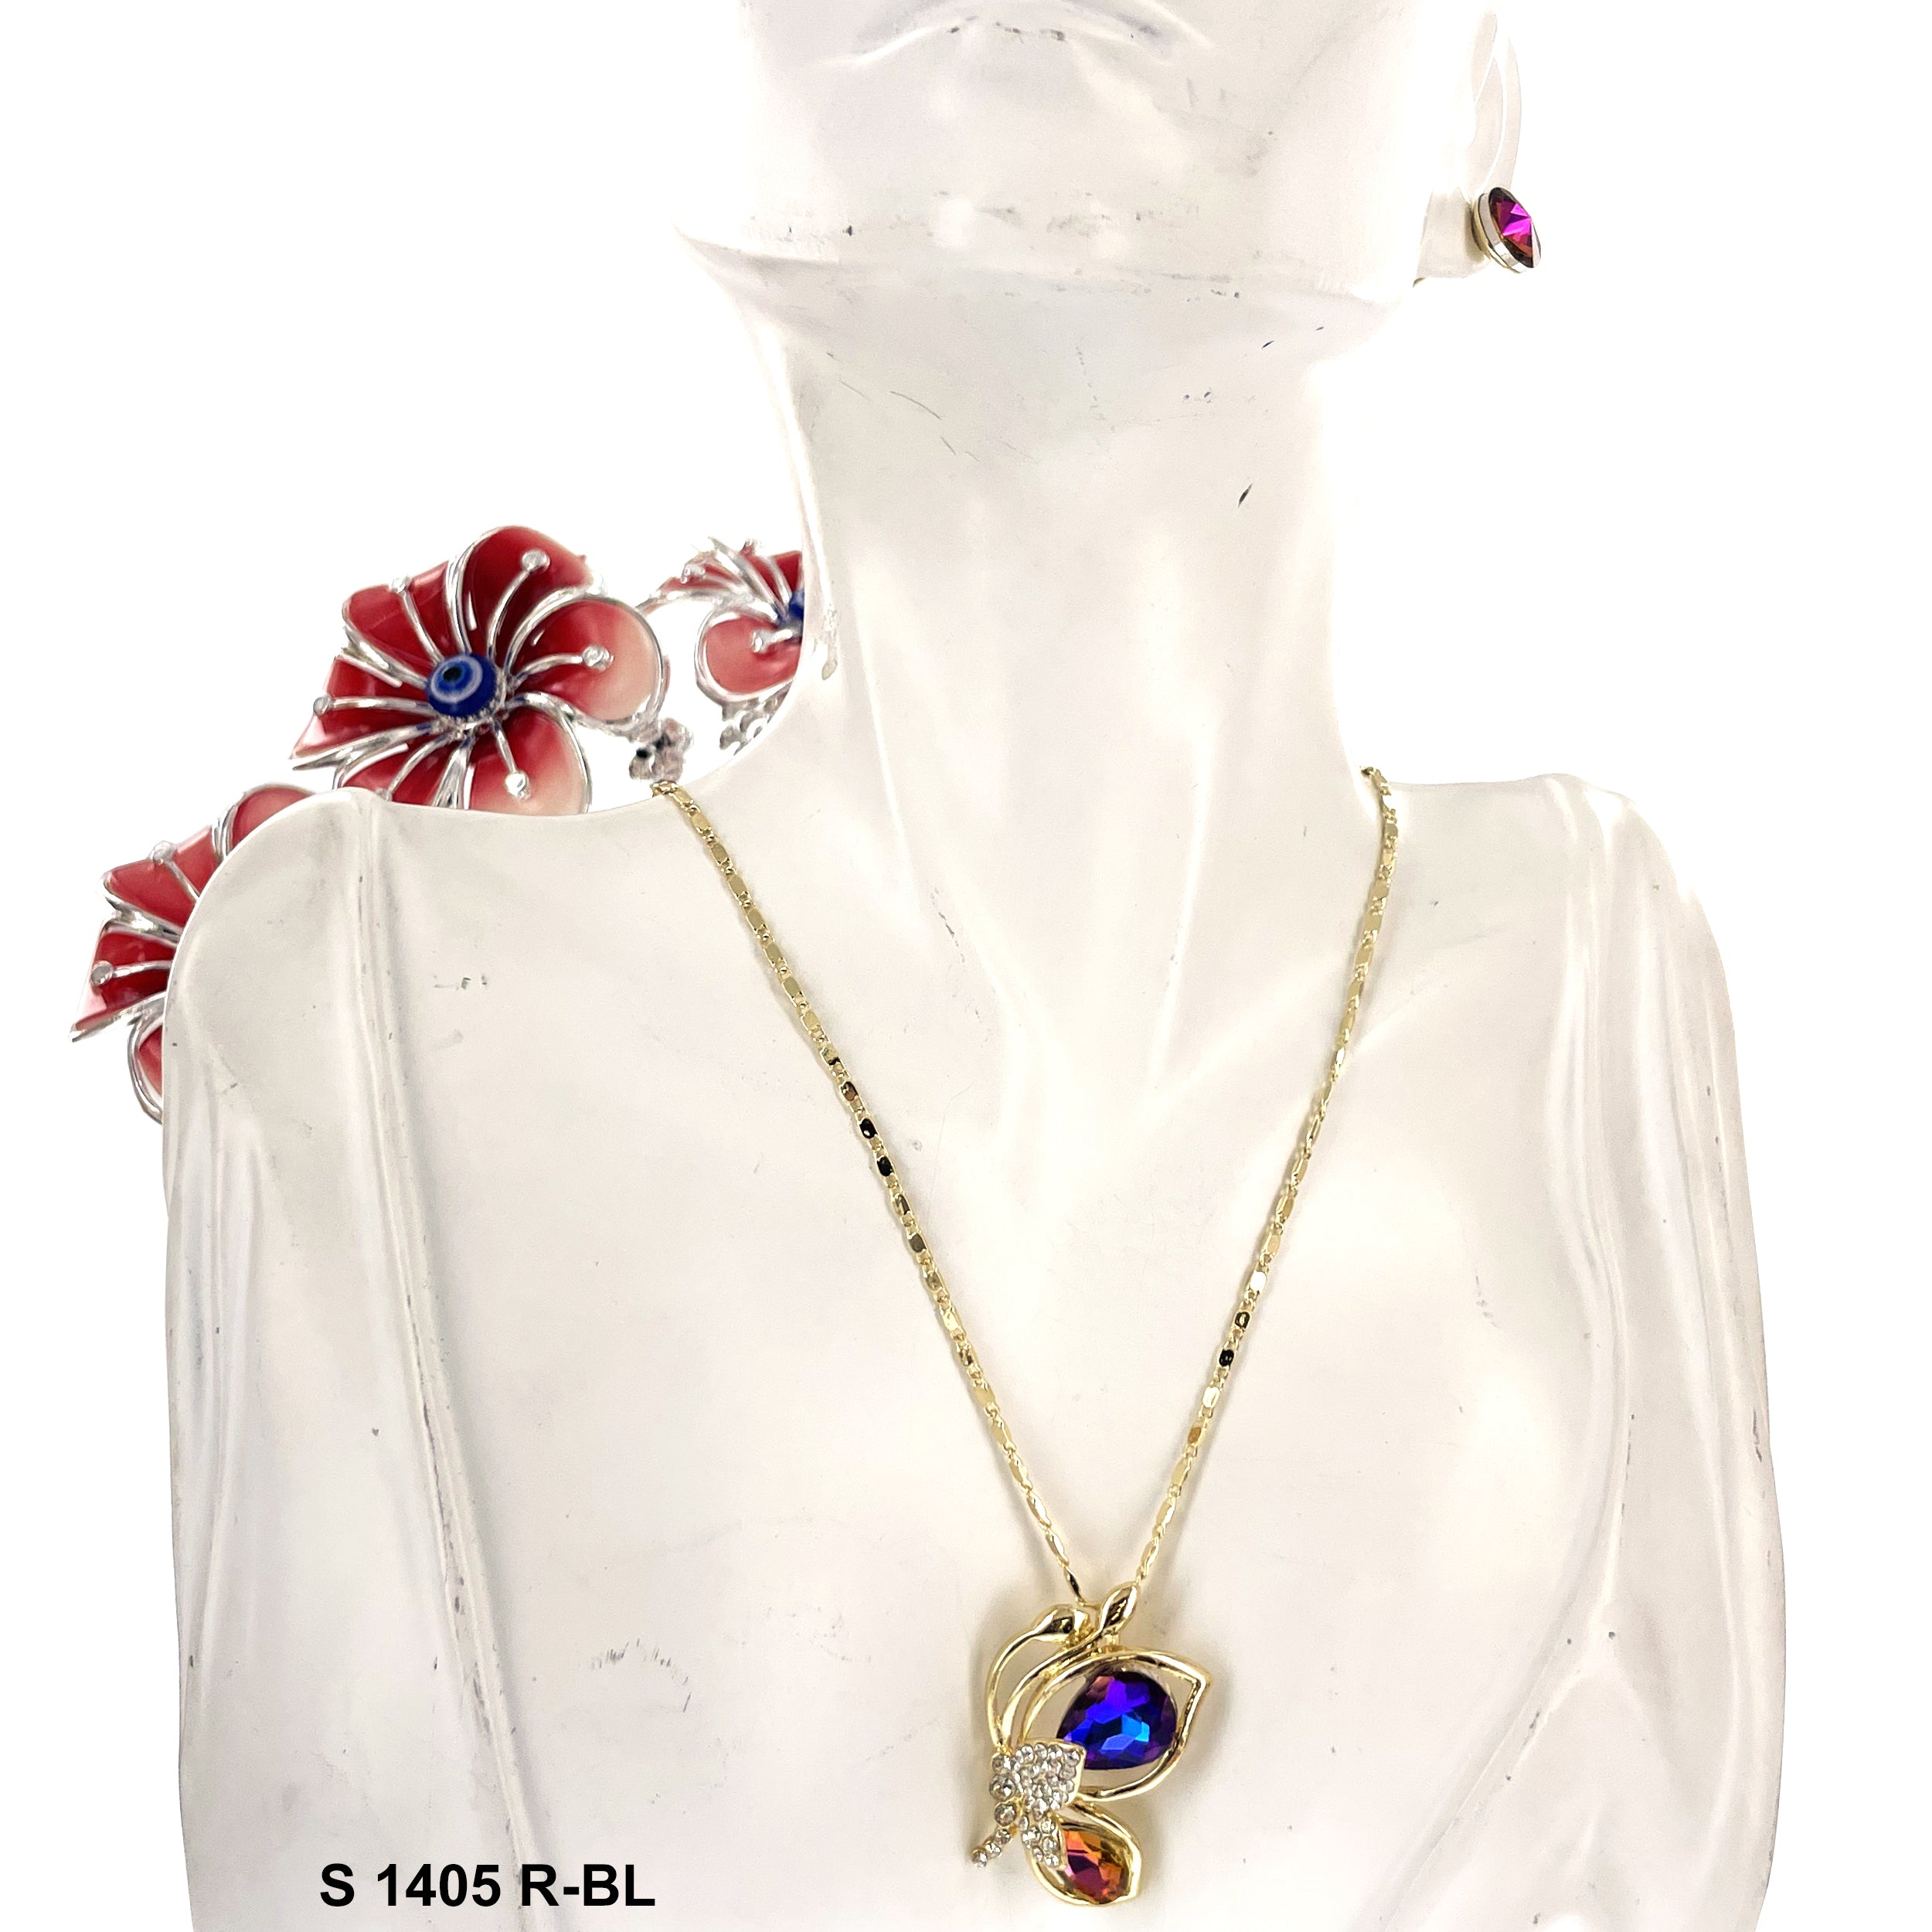 Butterfly Stoned Pendant Necklace Set S 1405 R-BL